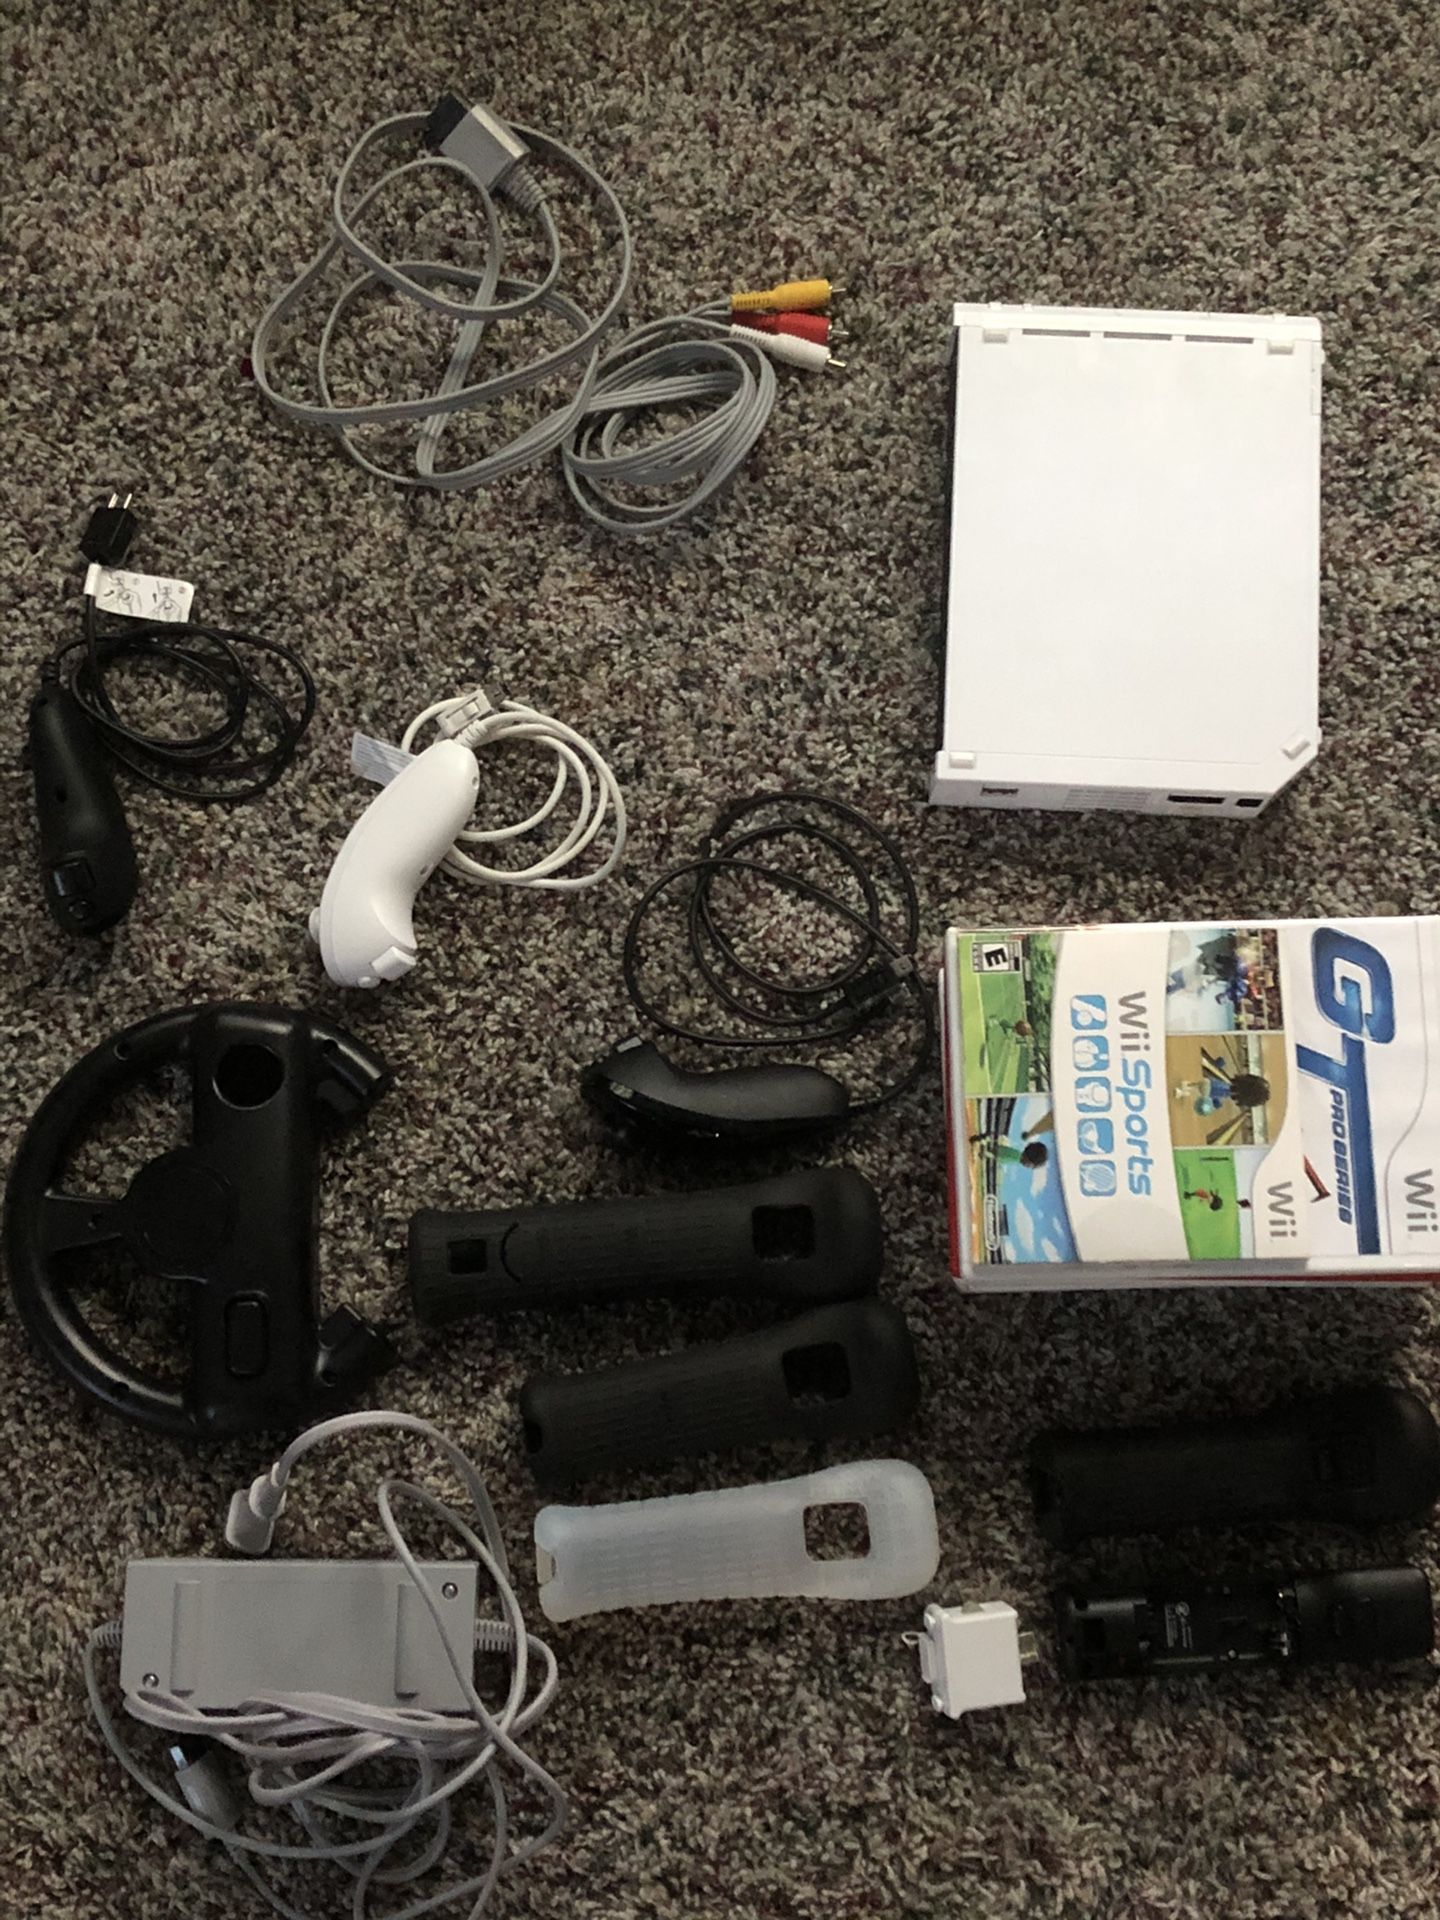 Wii with accessories